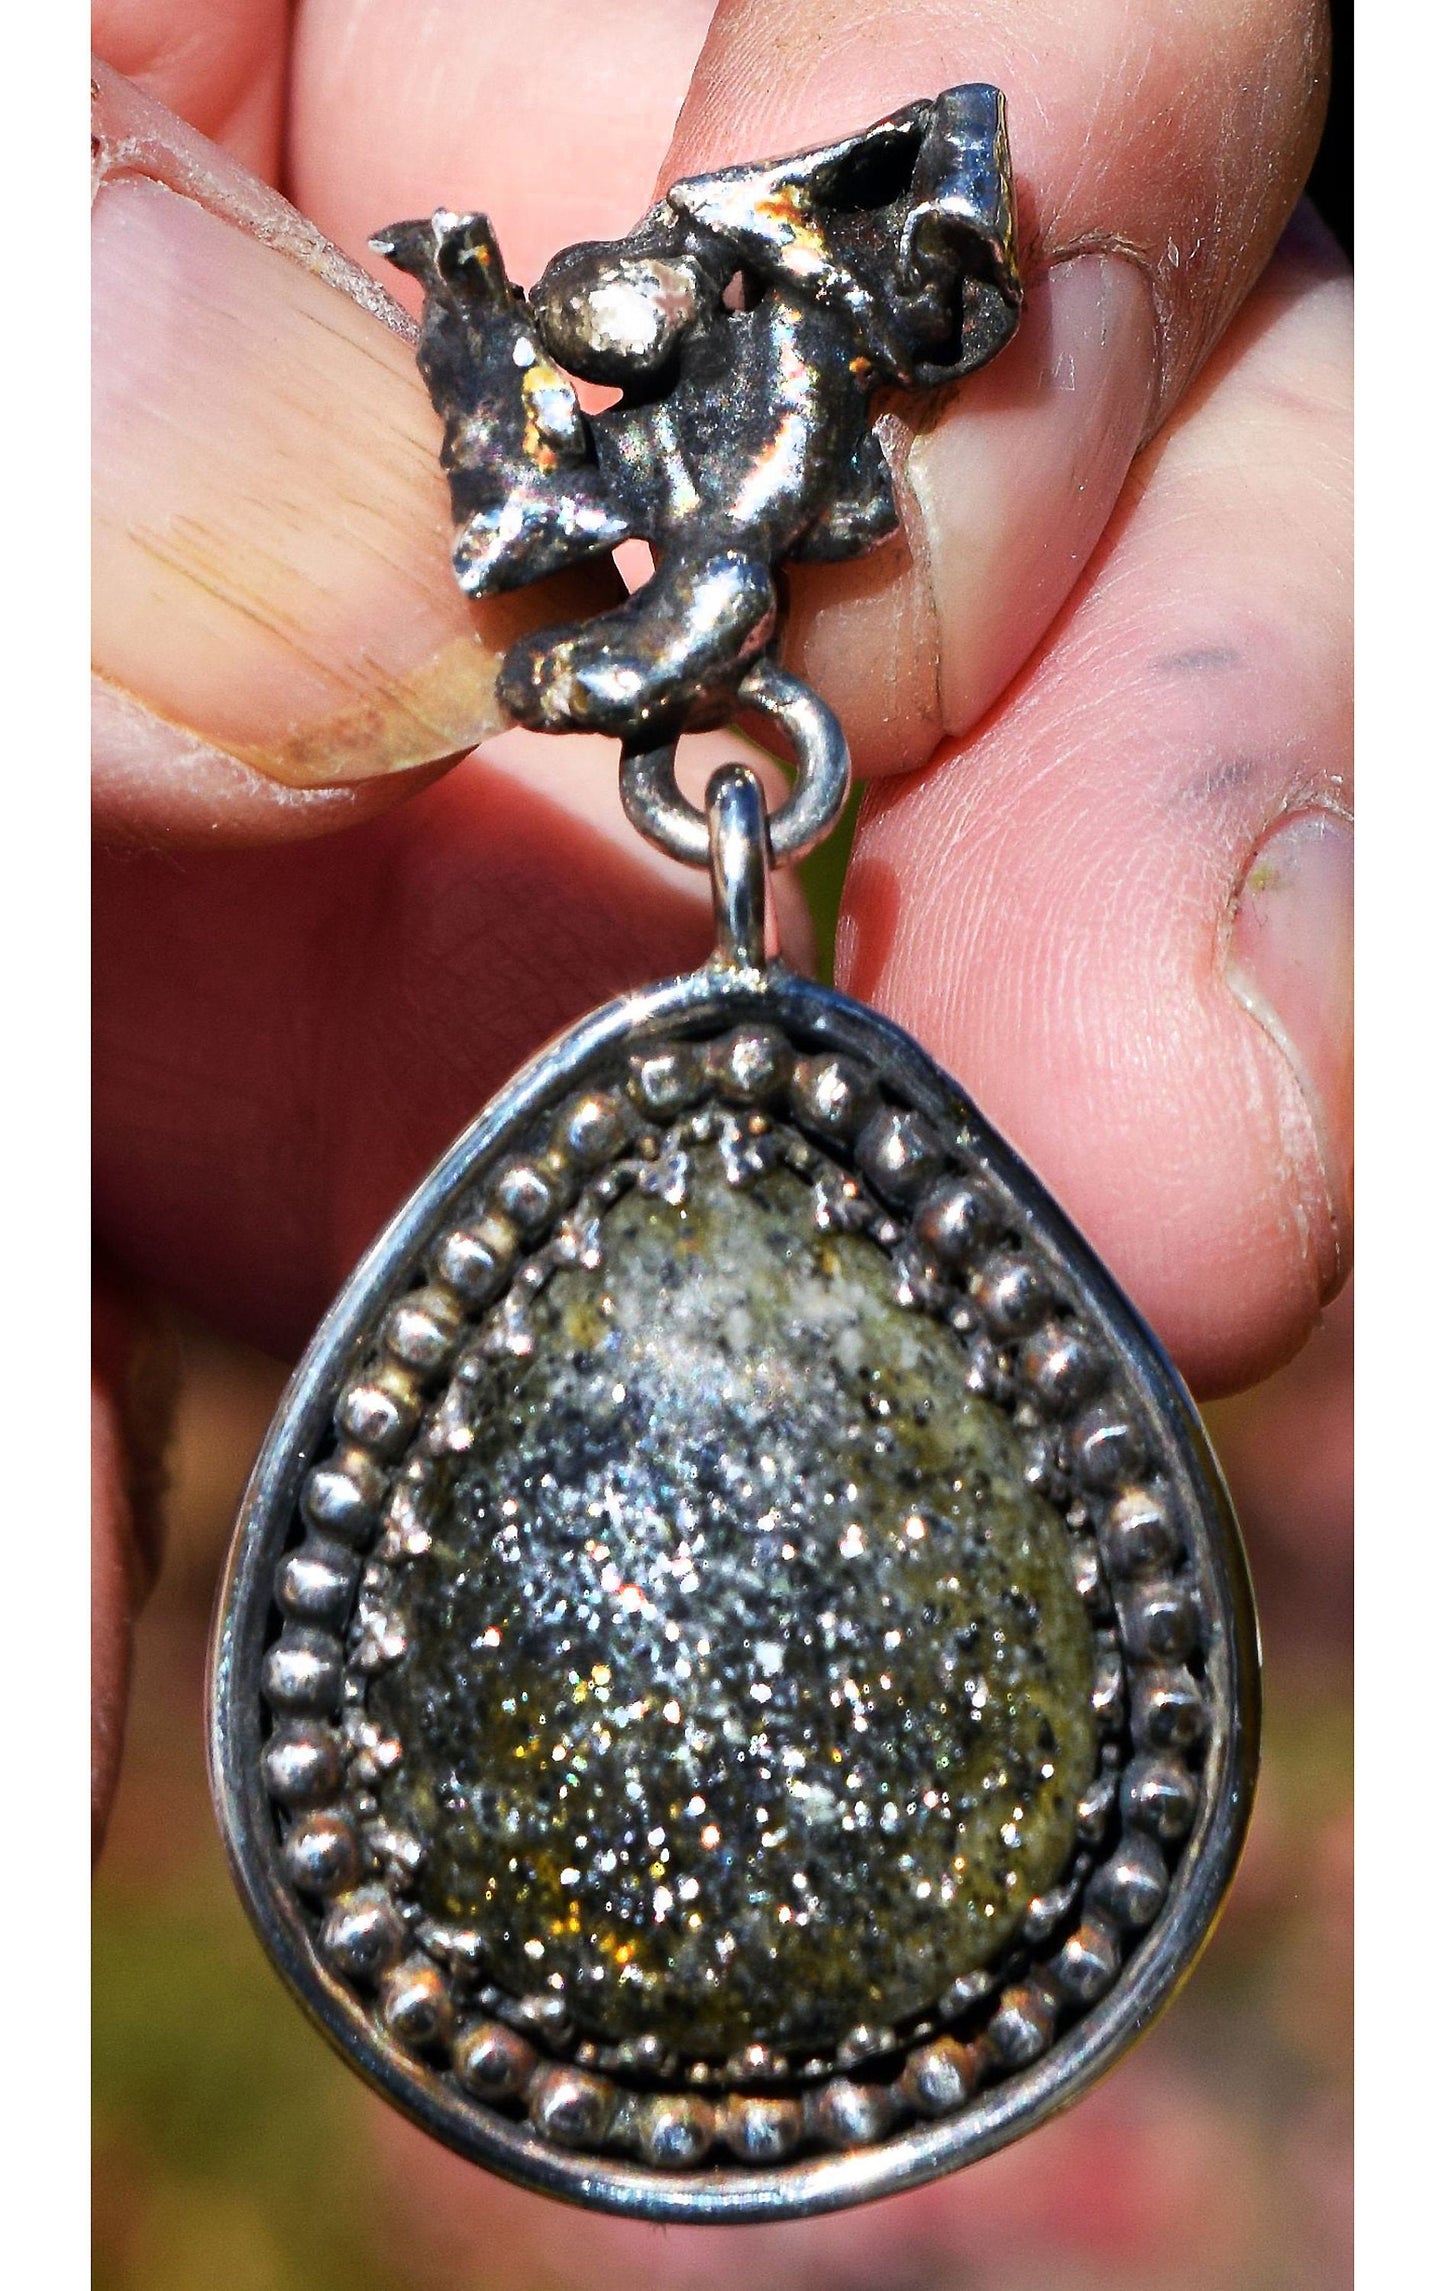 Iron pyrite crystals sparkling in agate, mounted in Sterling Silver.